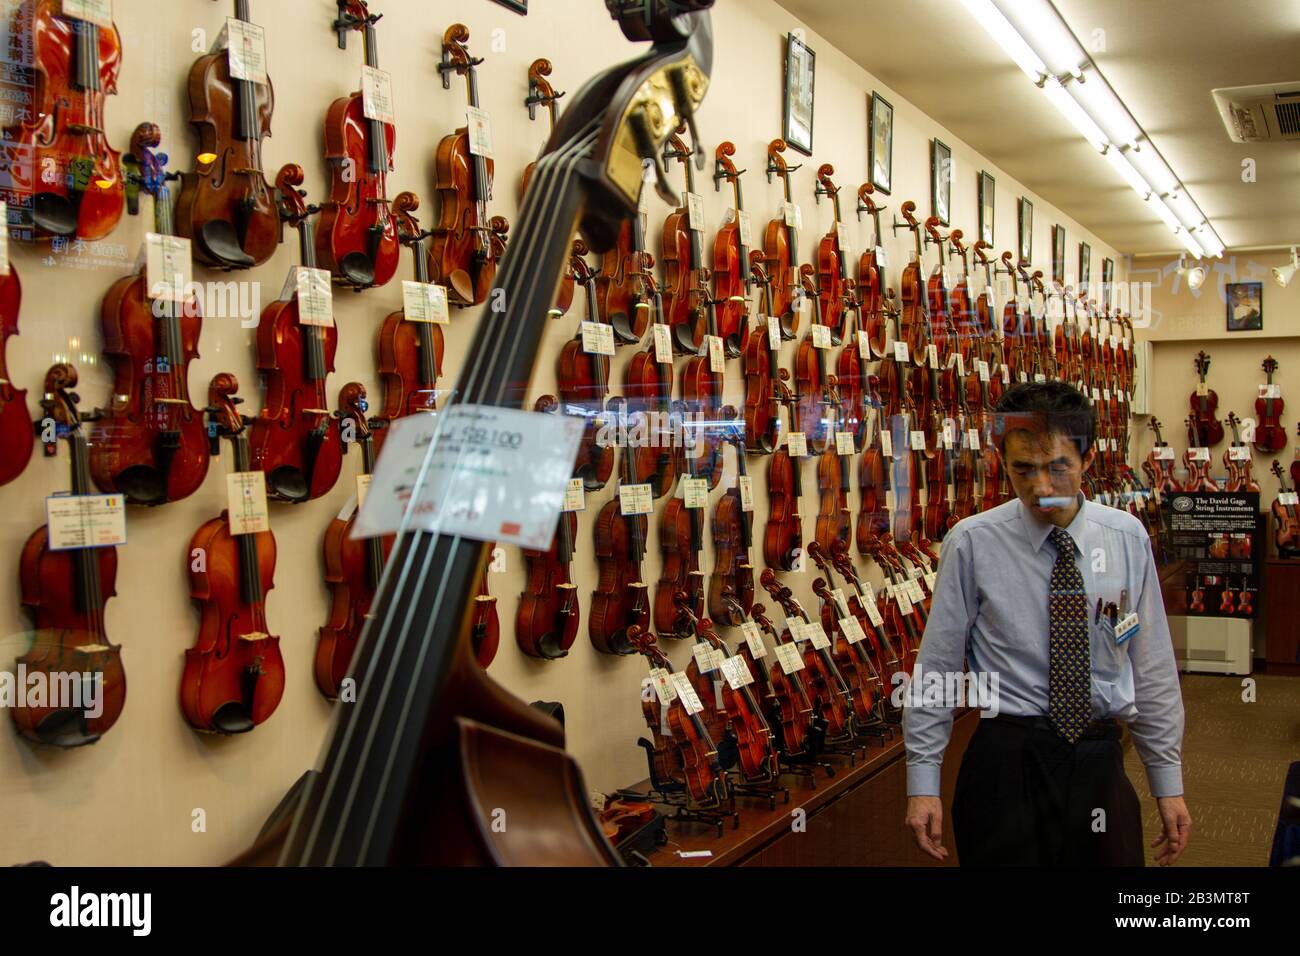 Violins on display in a musical instrument shop in Tokyo, Japan Stock Photo  - Alamy